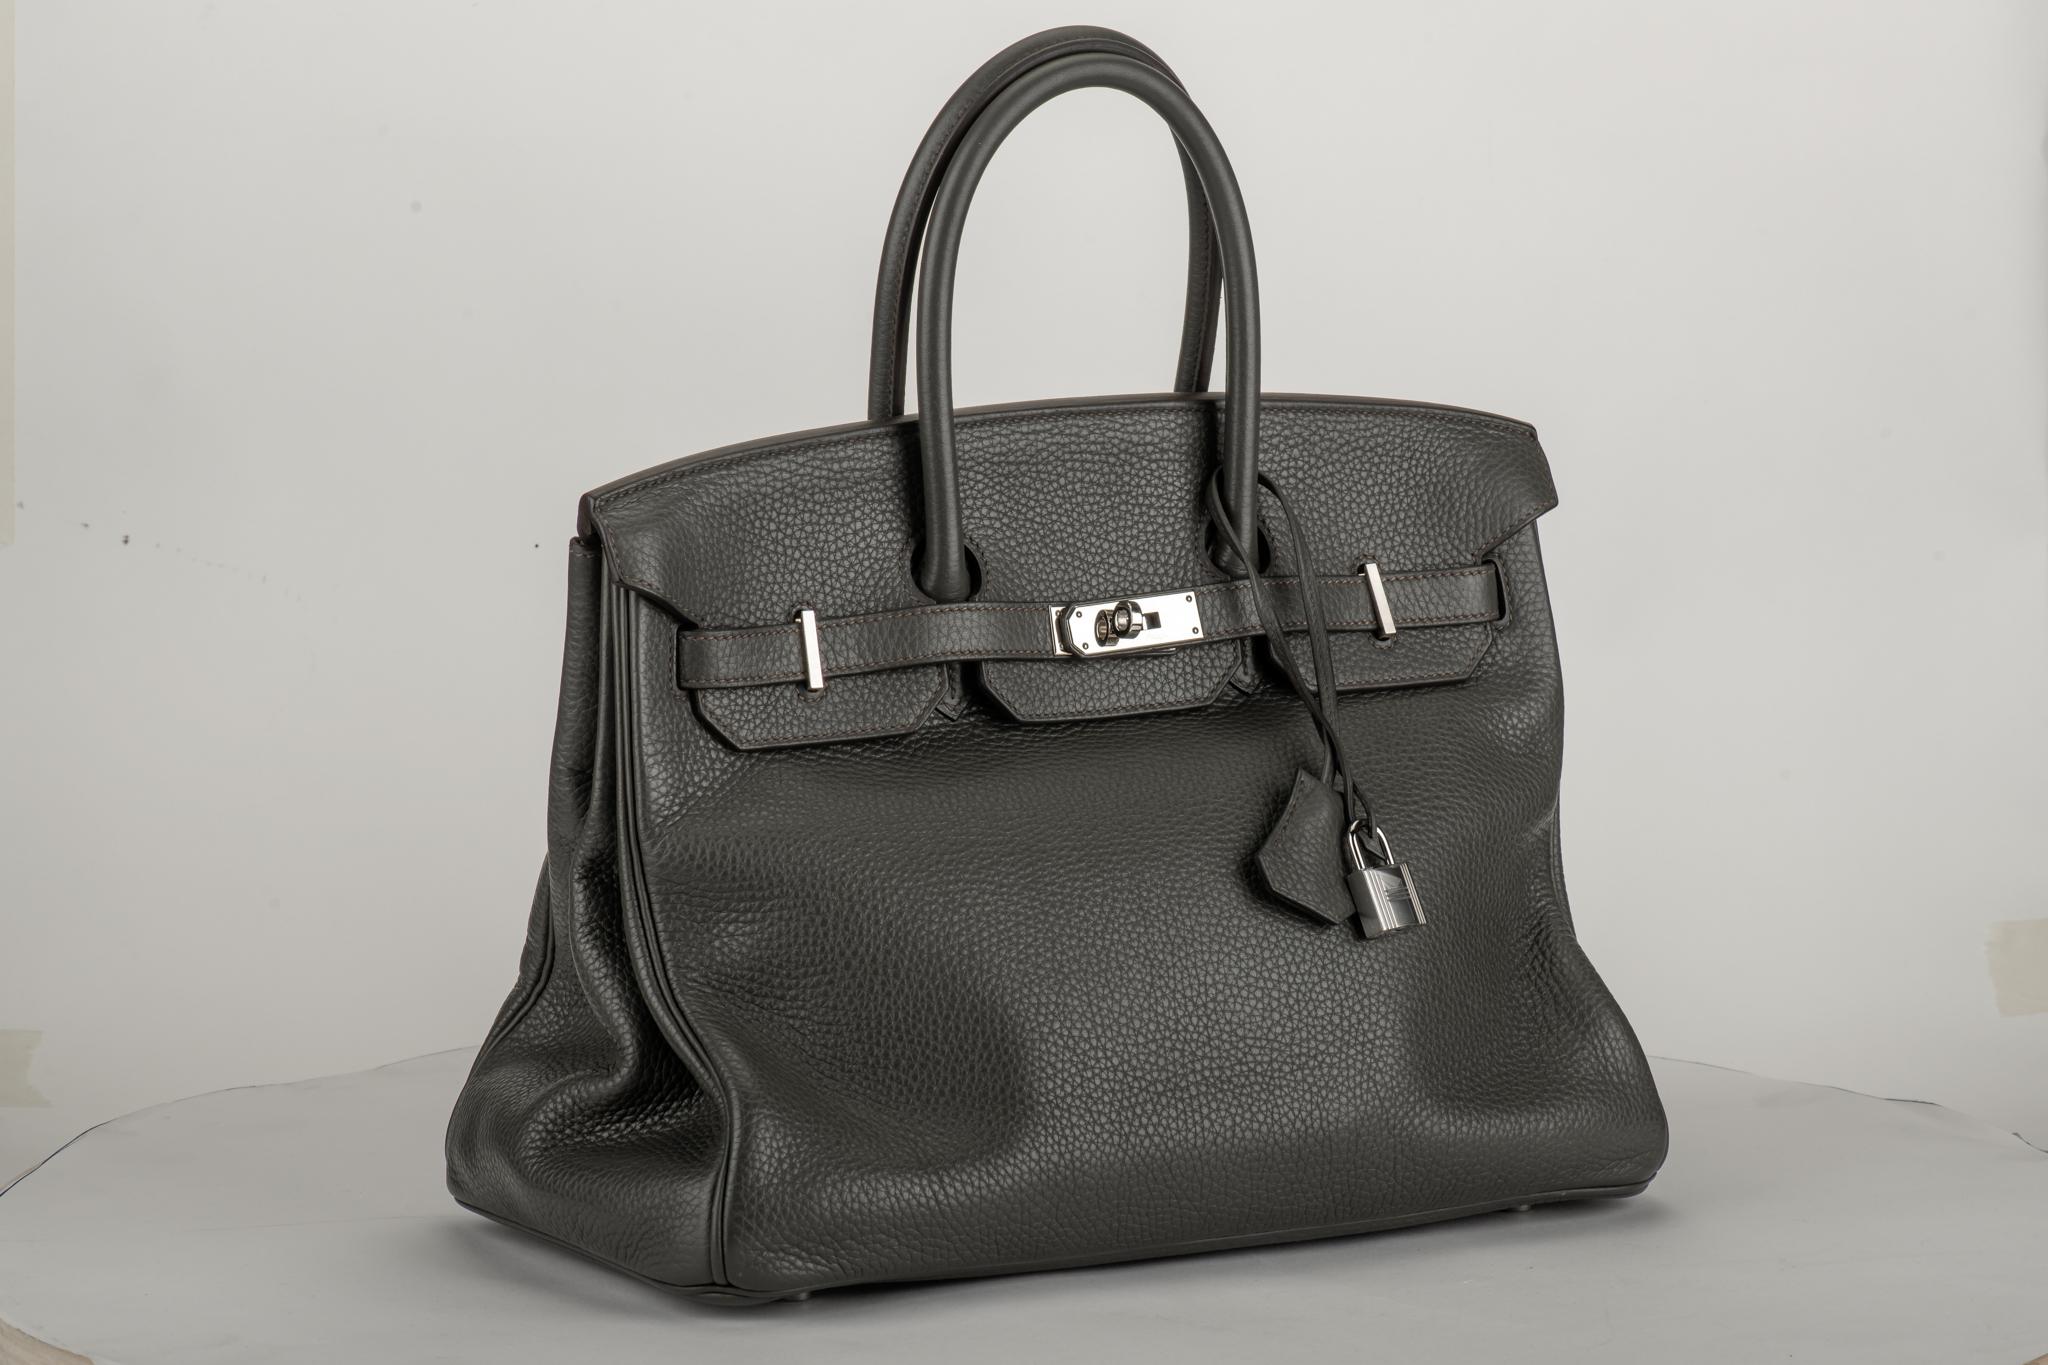 Hermès 35cm Birkin in gris elephant taurillon clemence leather with palladium hardware. Date stamp T for 2015. Comes with clochette, tirette, two locks, keys, dust cover.